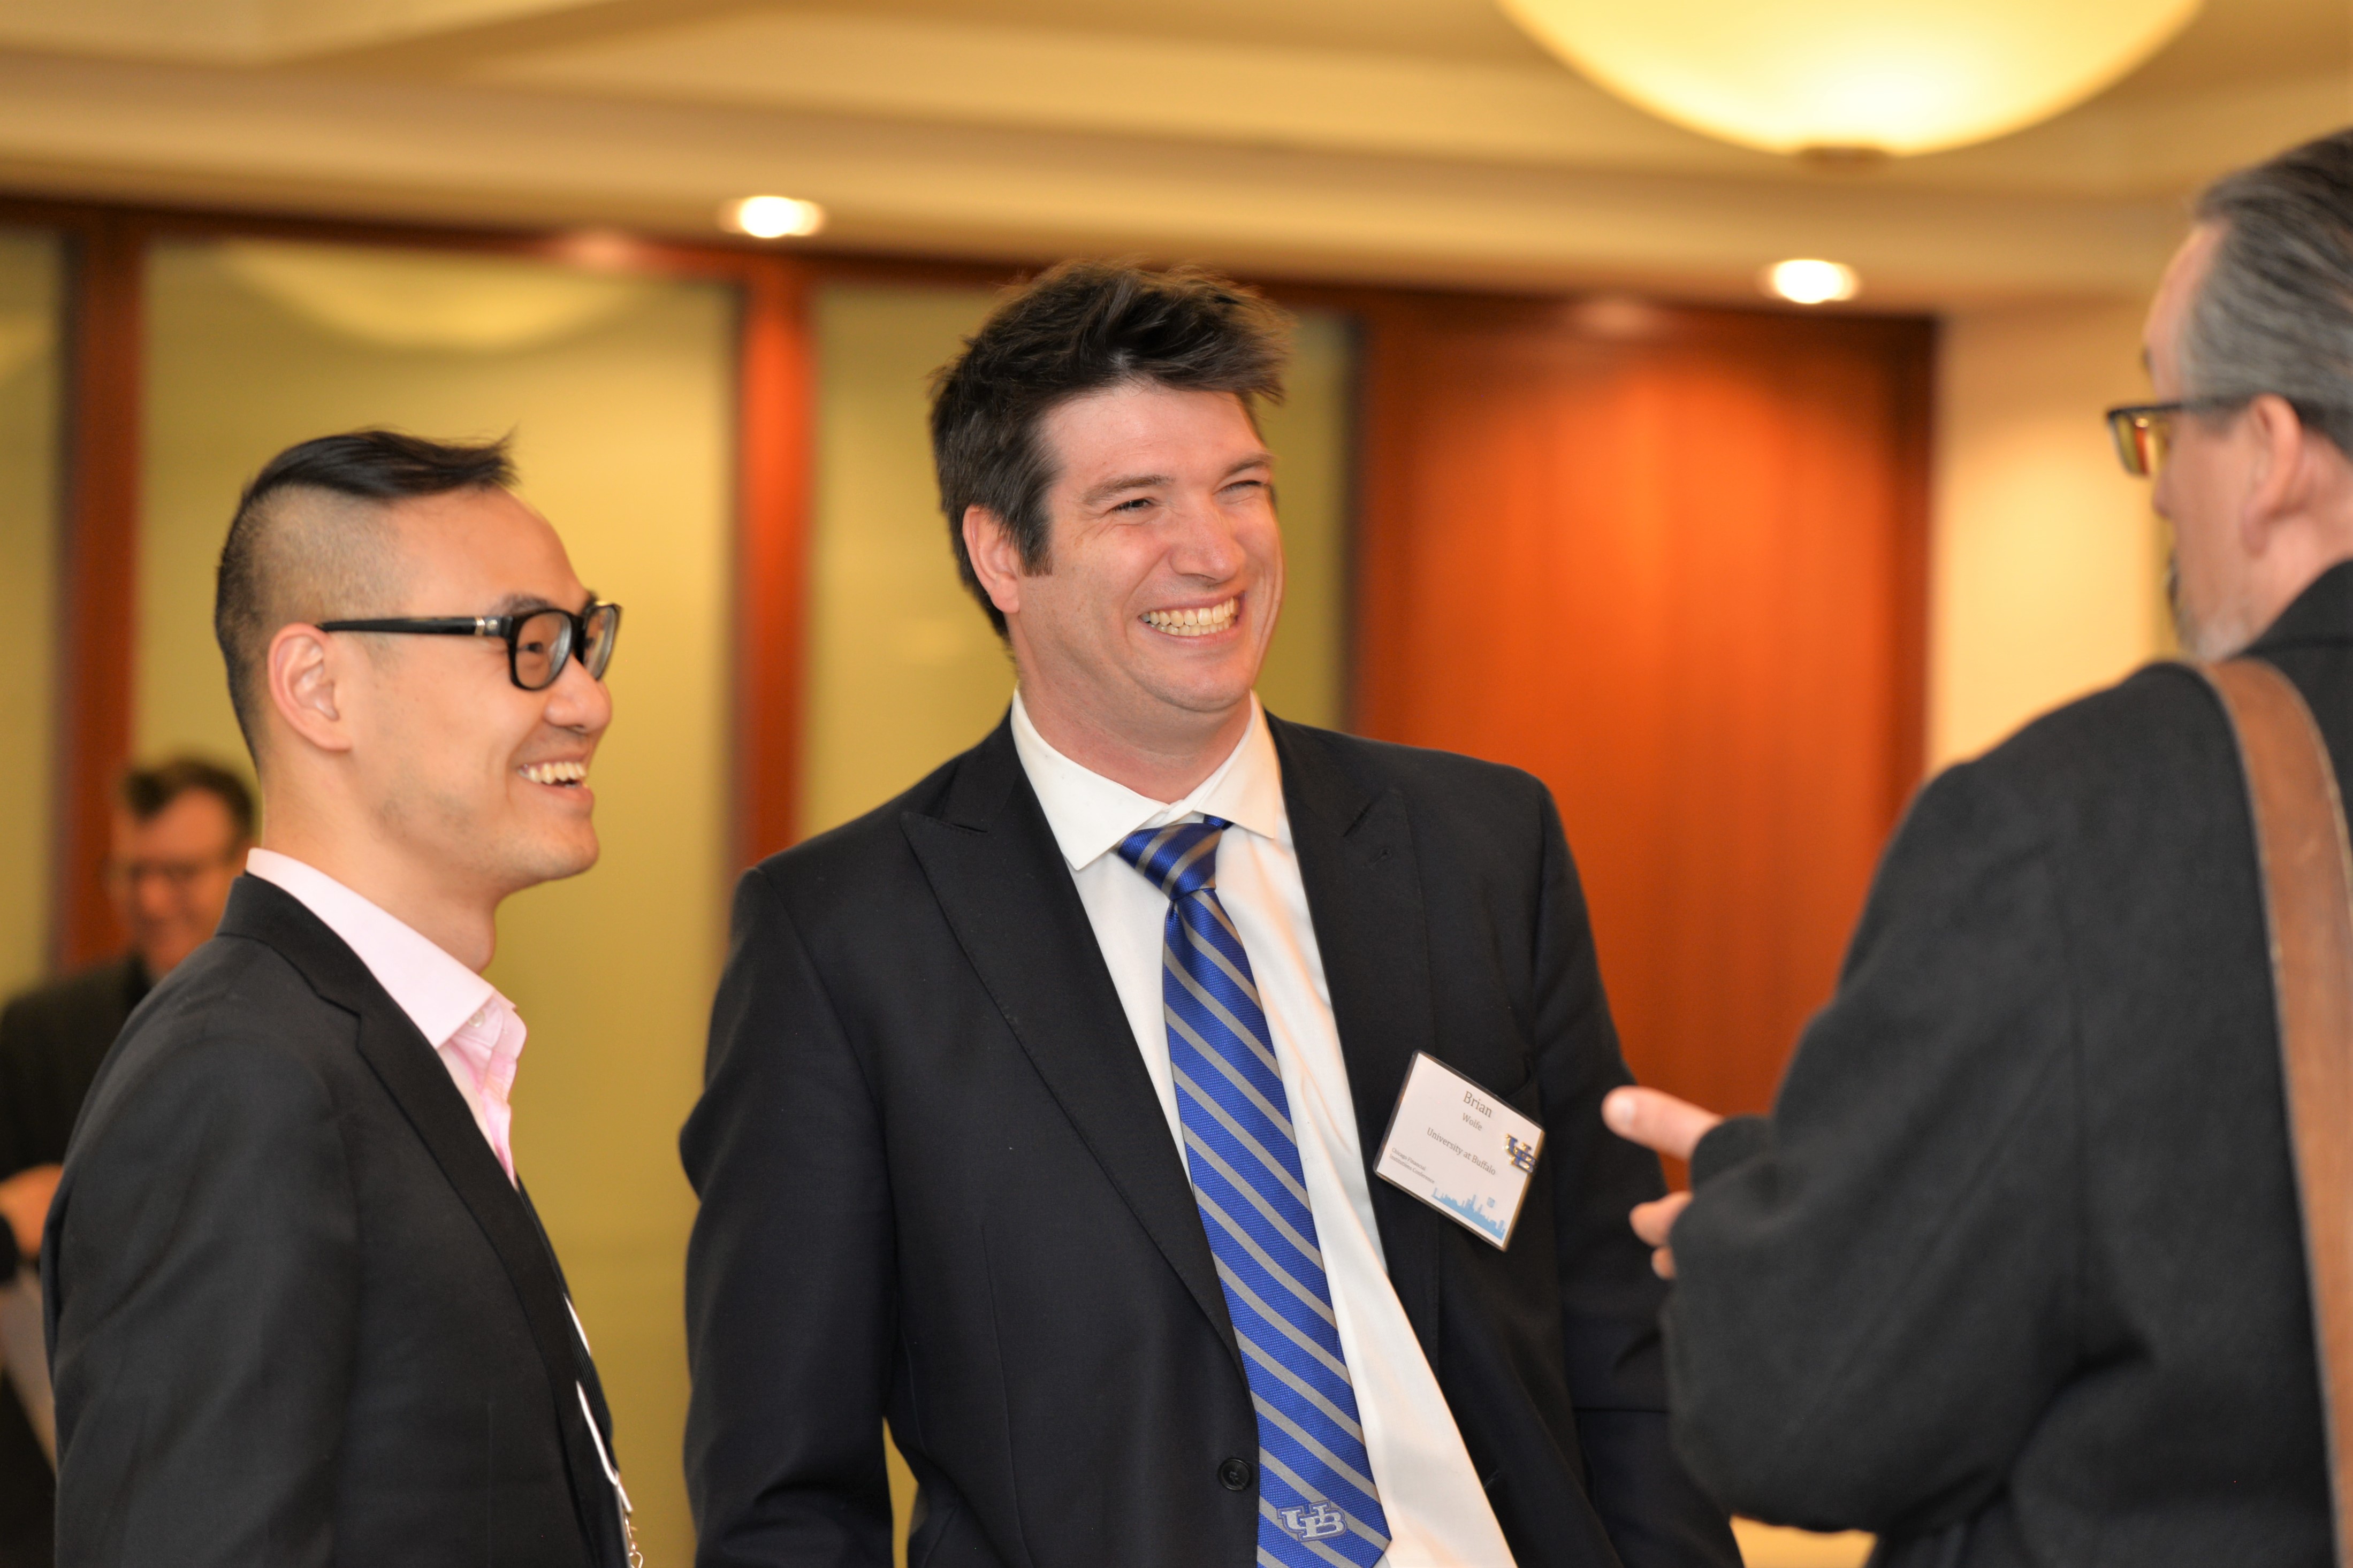 Photos from the Chicago Financial Institutions Conference